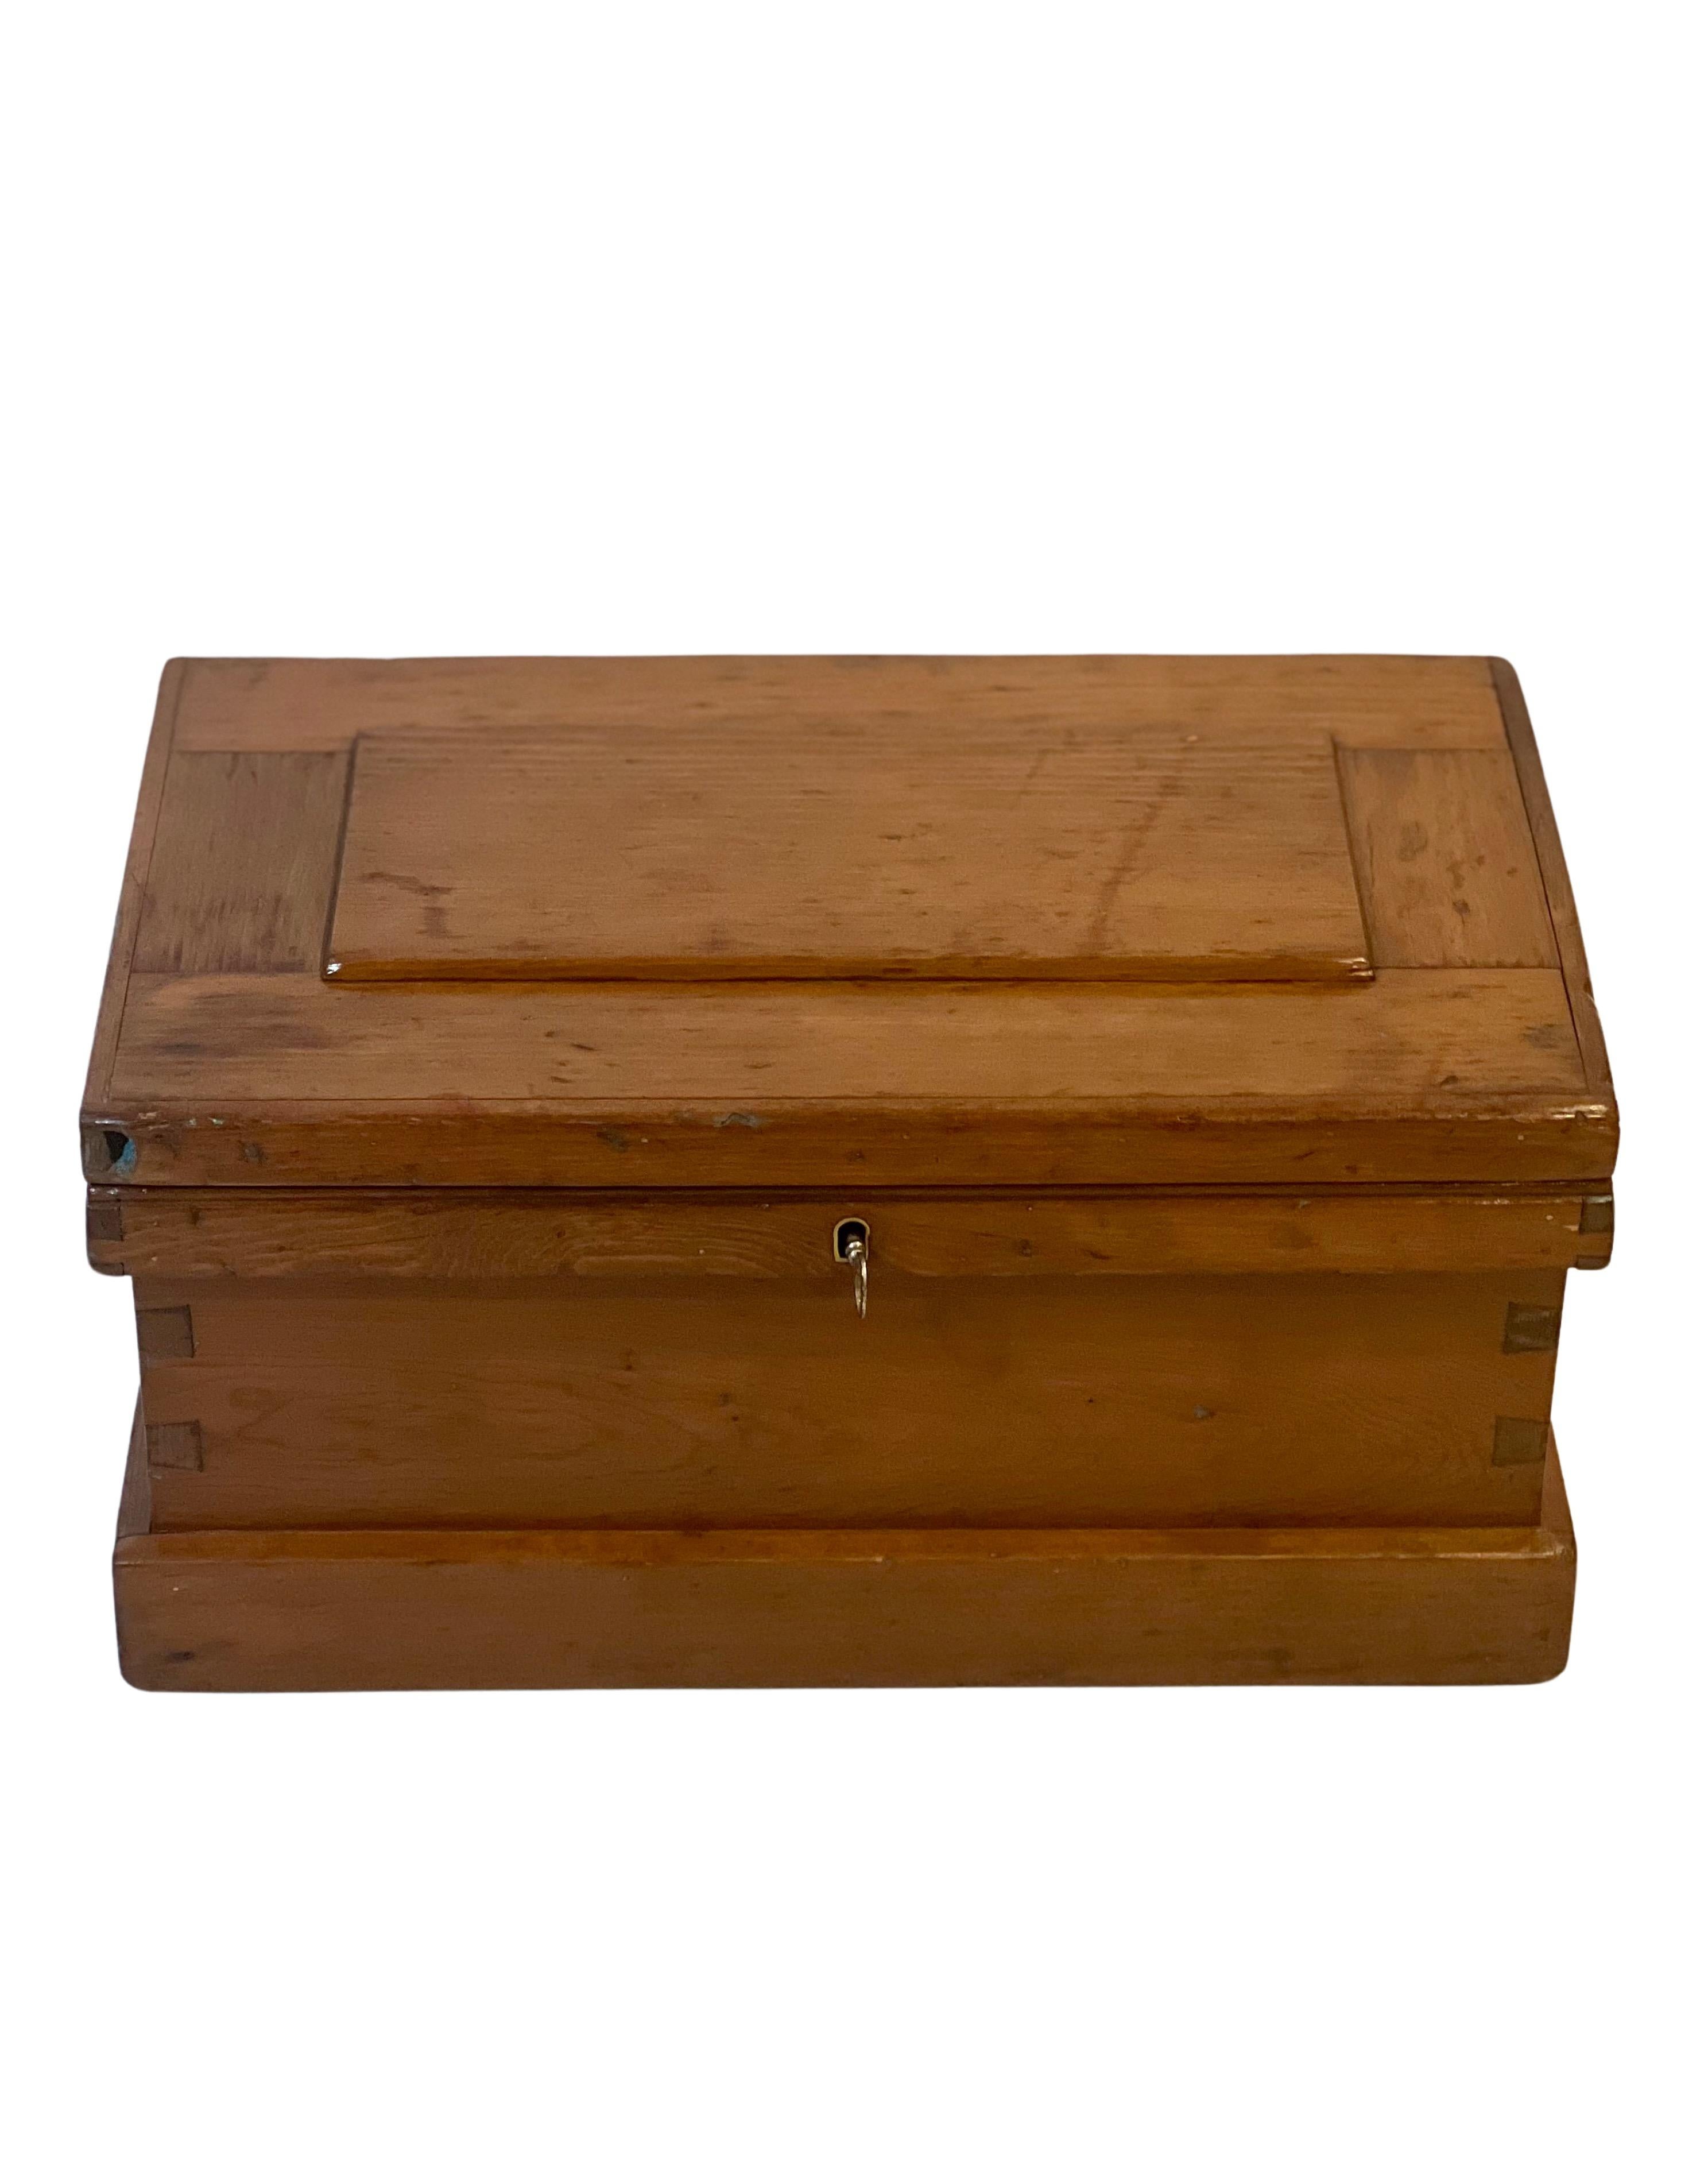 Rustic Antique Handcrafted Small Merchant's Chest with Lock and Key For Sale